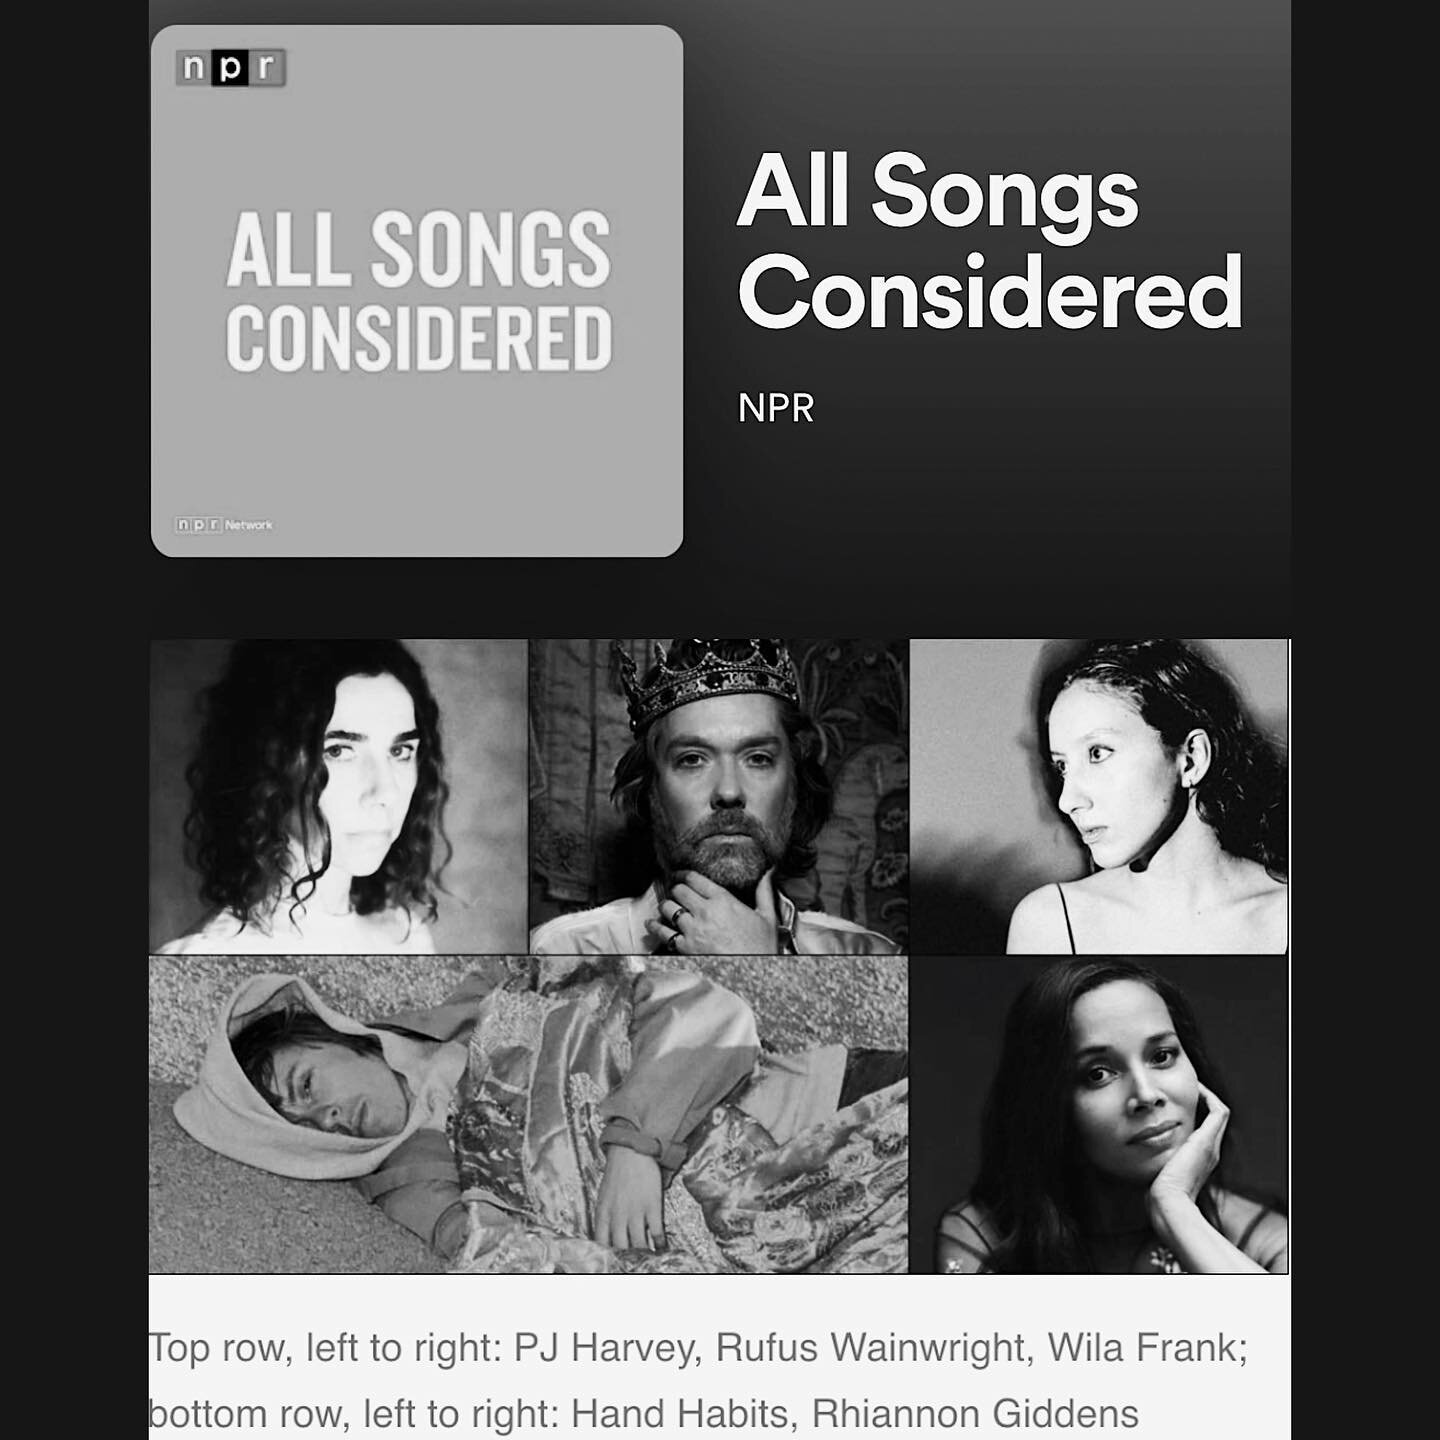 Honored to have &lsquo;Tonight&rsquo; featured on NPR&rsquo;s All Songs Considered podcast alongside one of my heroes @pjharveyofficial as well as legend @rufuswainwright @hand.habits and @rhiannongiddens 🖤🖤🖤 Thank you thank you! @nprmusic